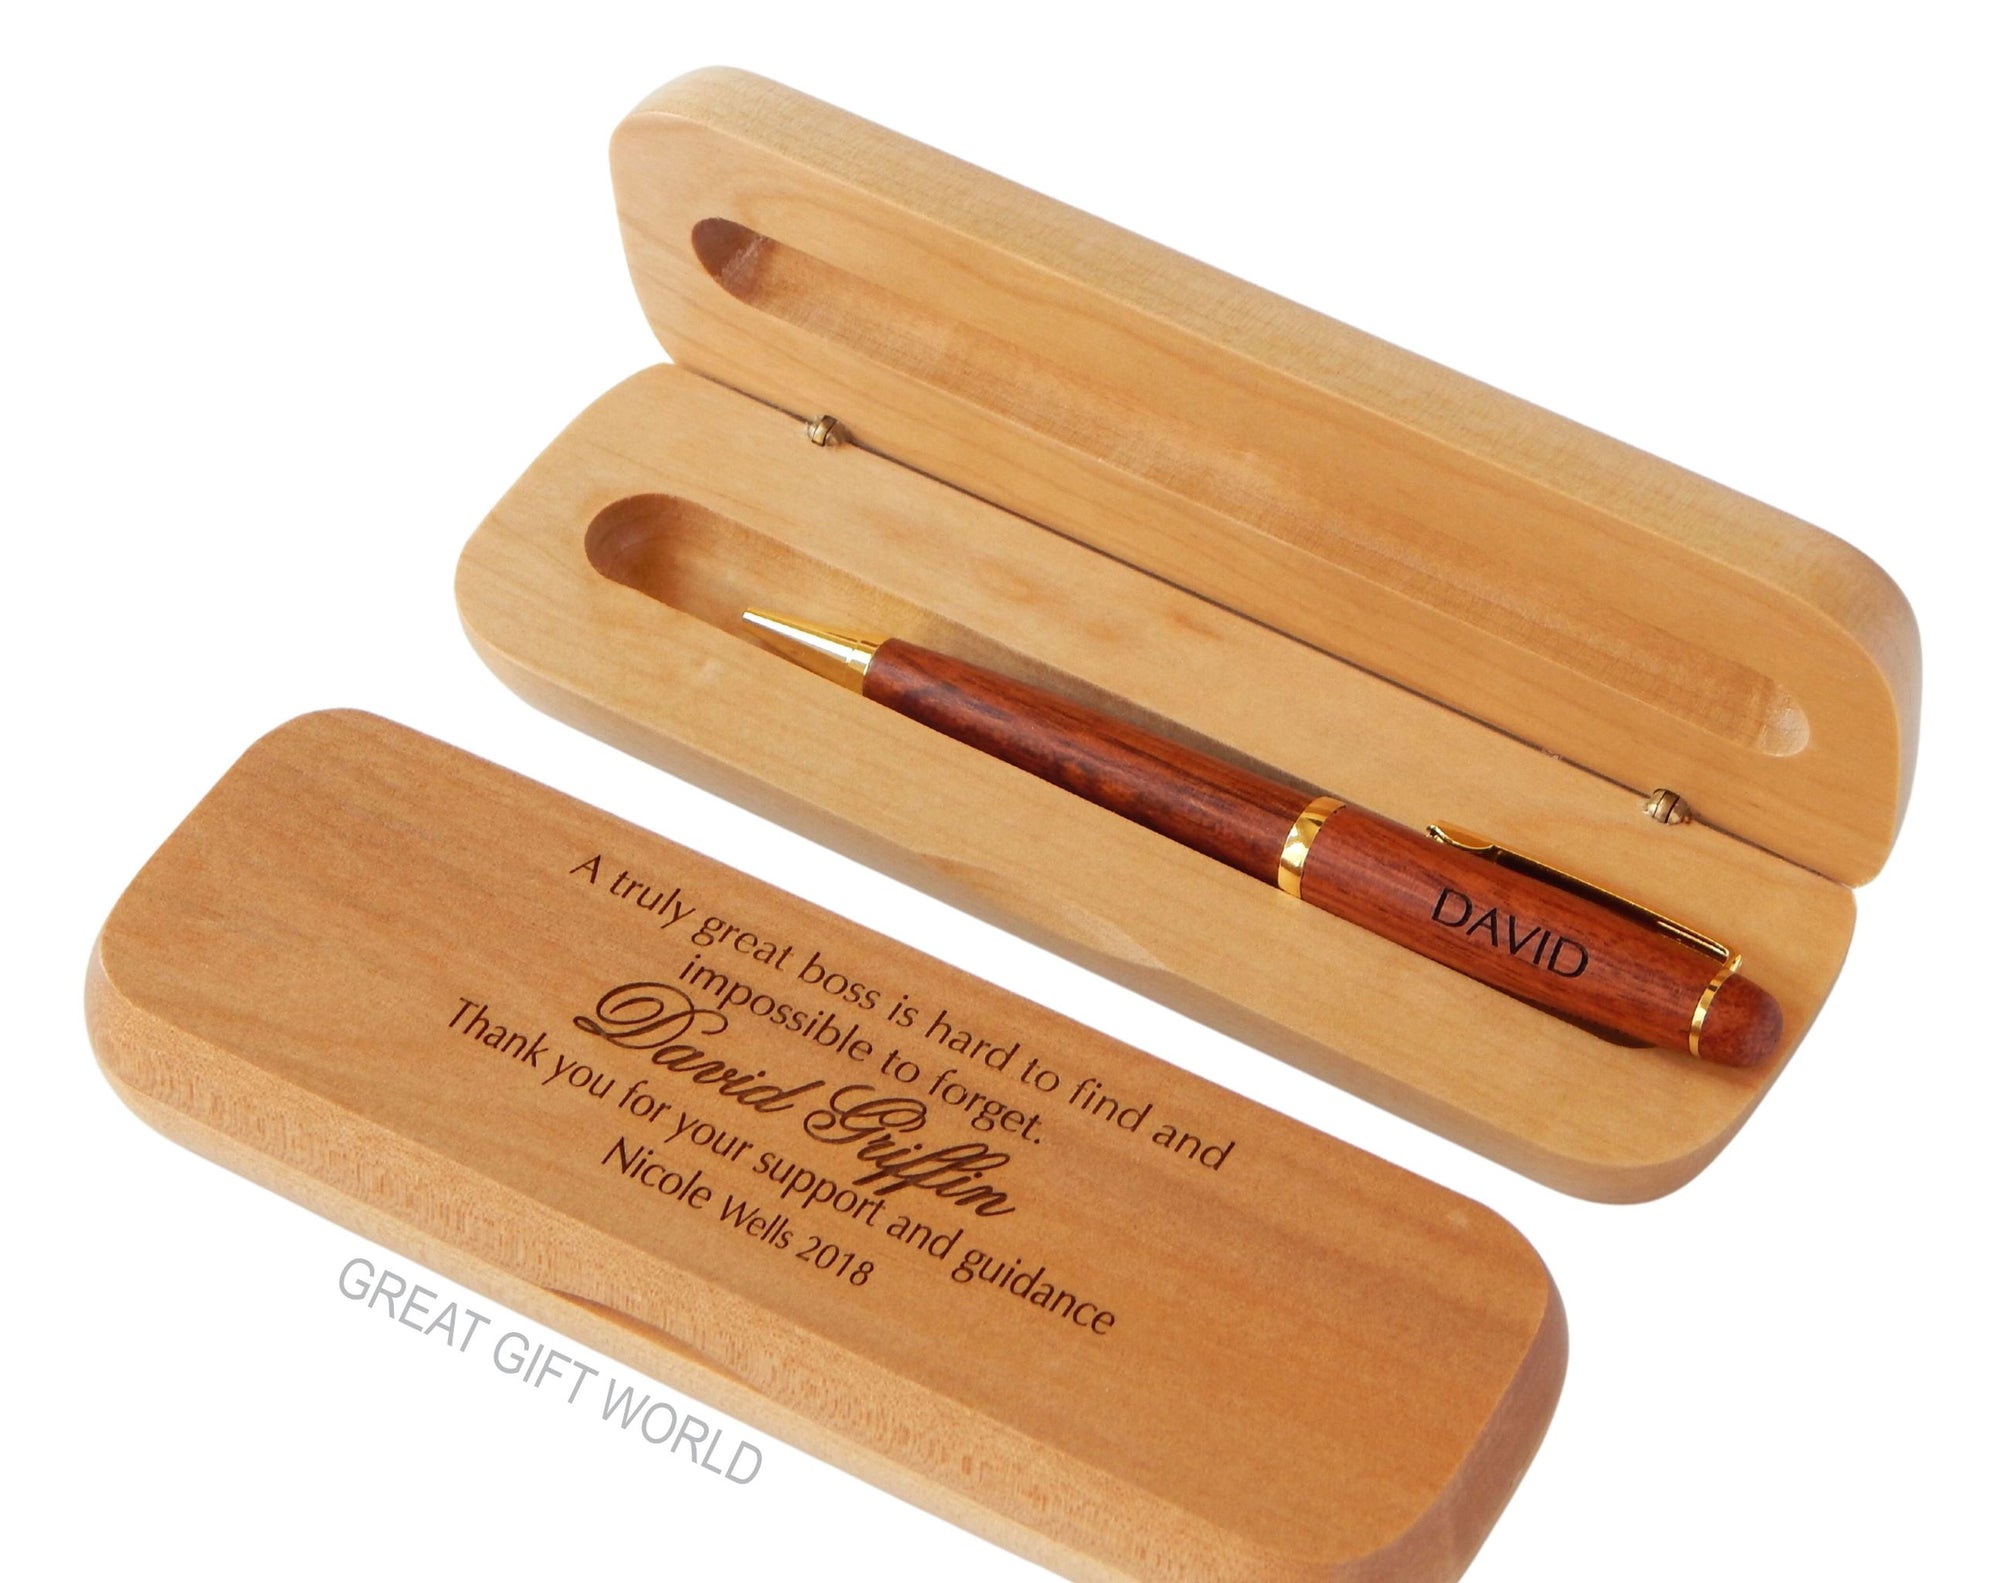 Coworker Leaving Gift | New Job Gift for Boss | Personalized Wood Pen